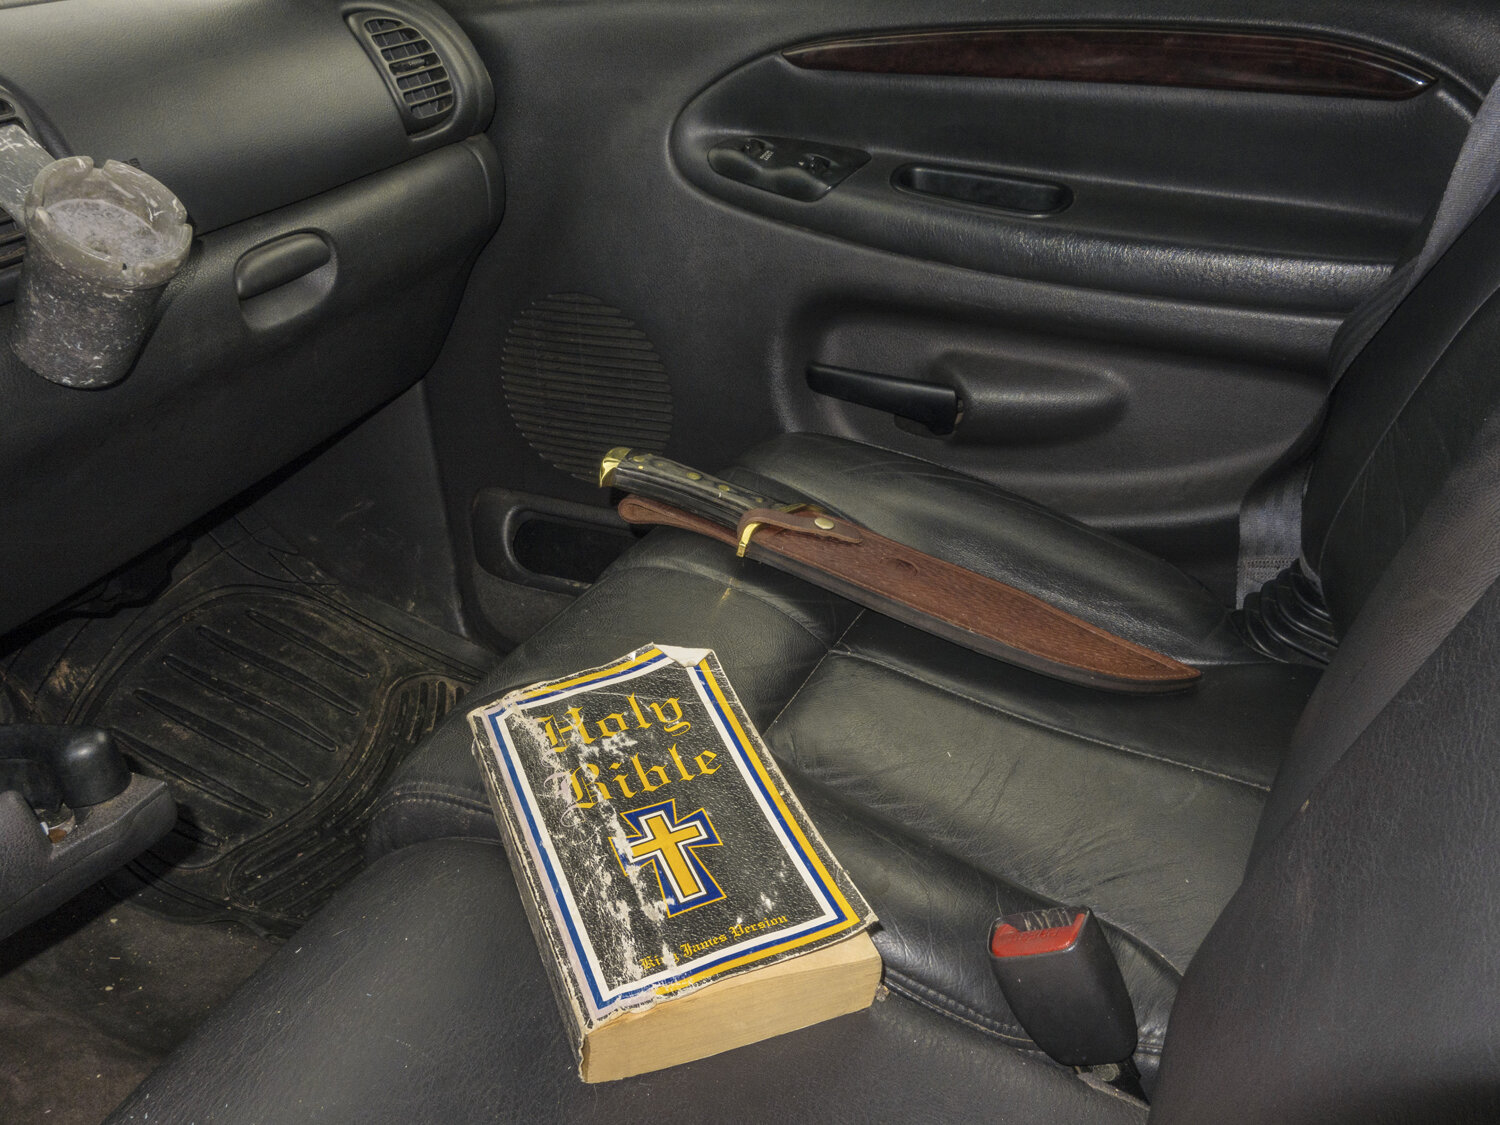  M L Casteel,  Untitled, Knife with Bible , 2014 